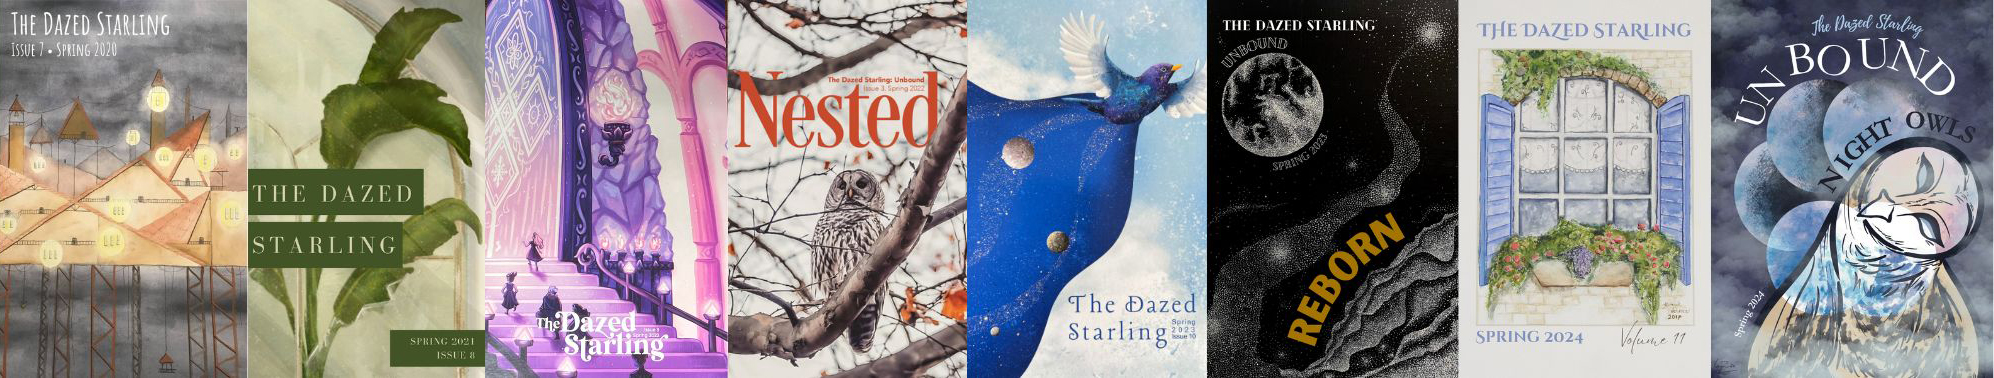 dazed starling covers